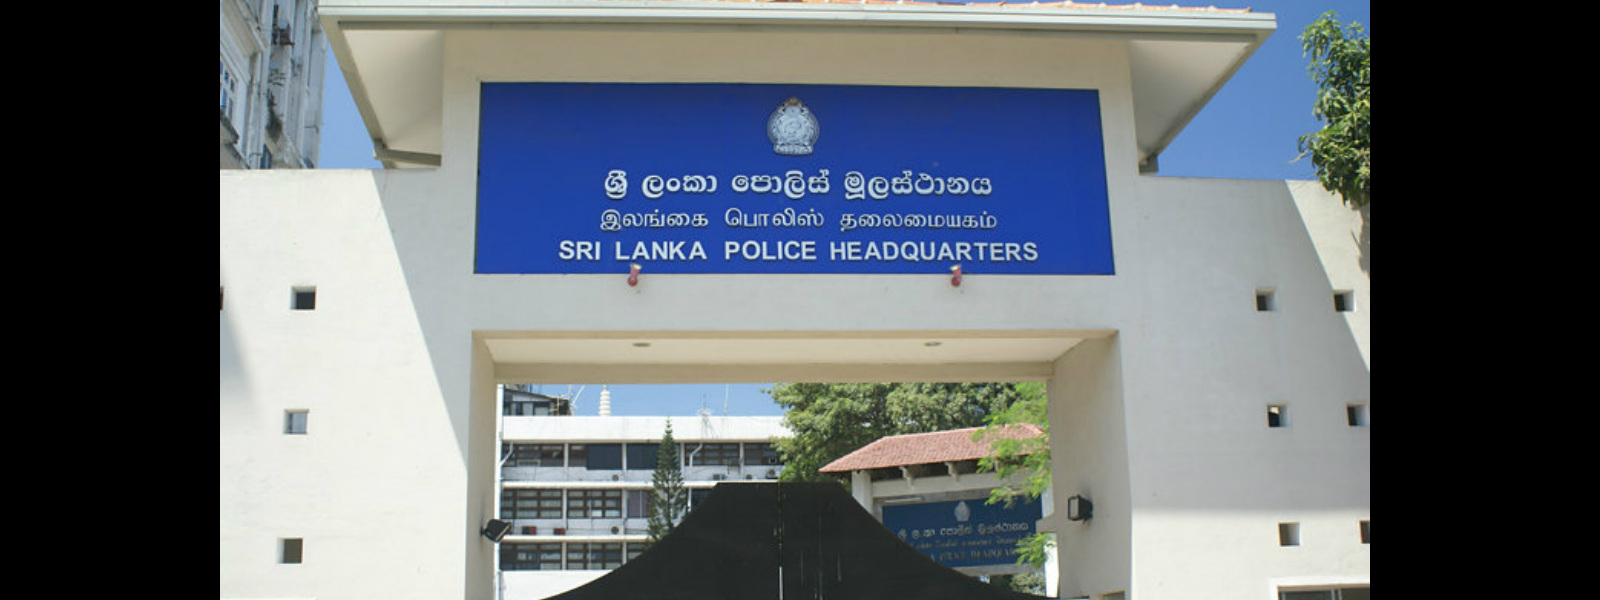 A special operation center at Police Headquaters